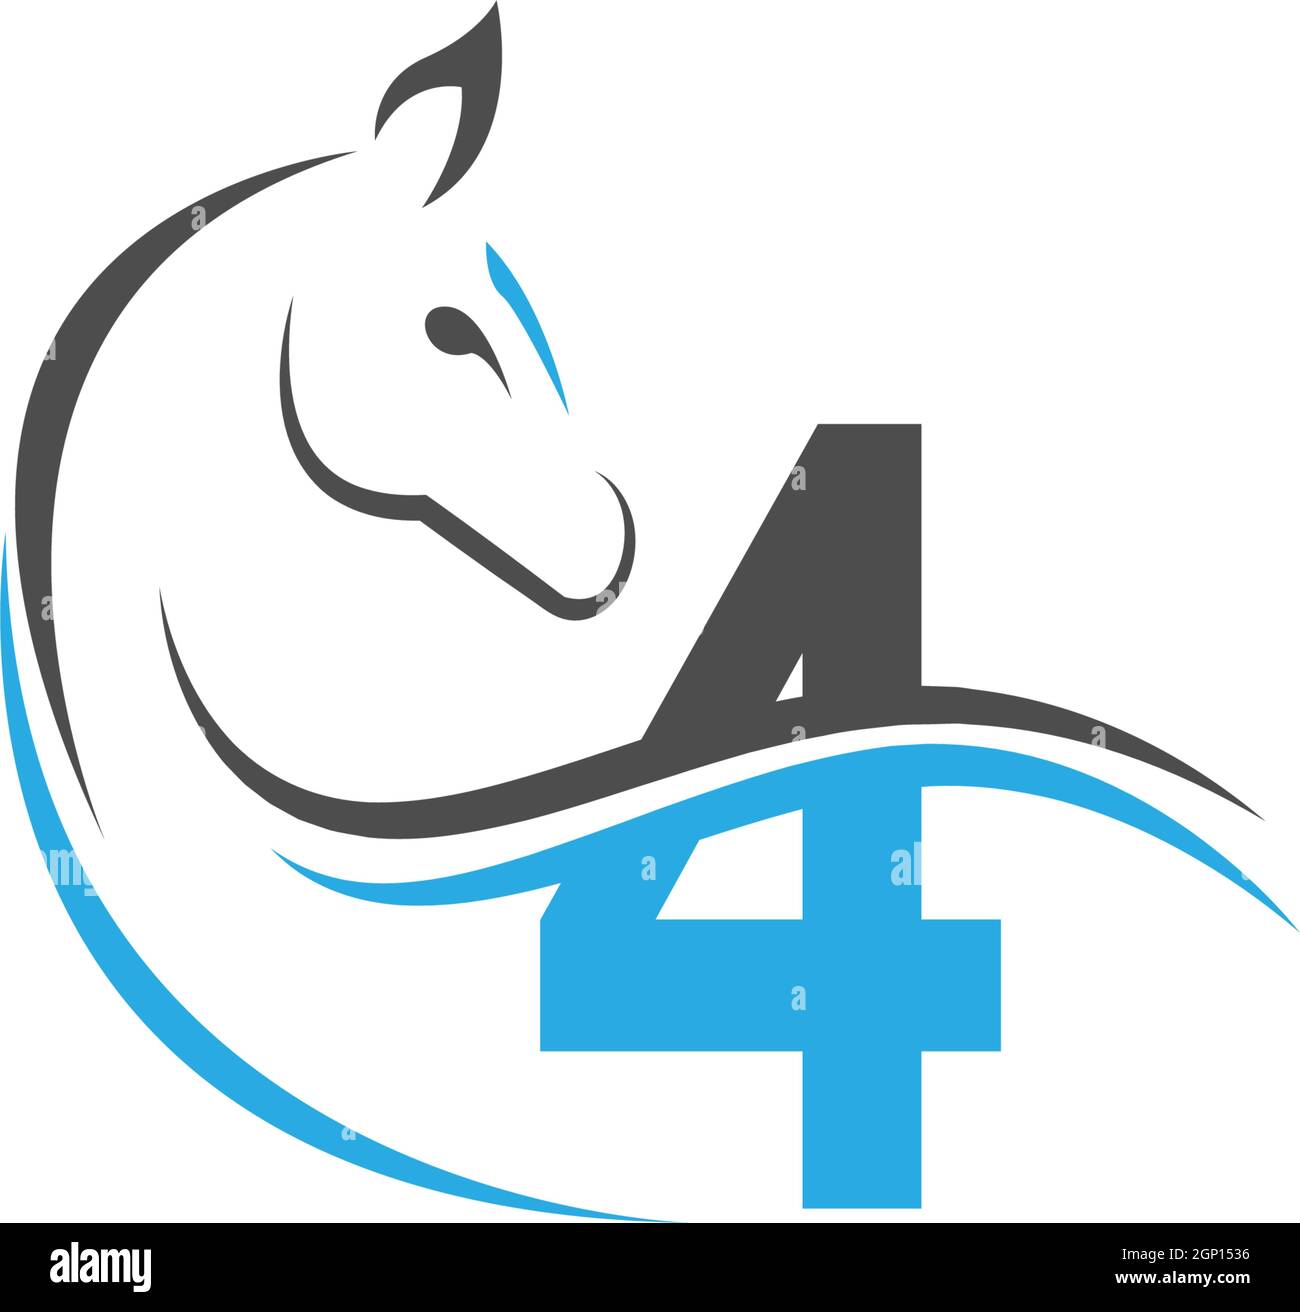 Number 4 icon logo with horse illustration design Stock Vector